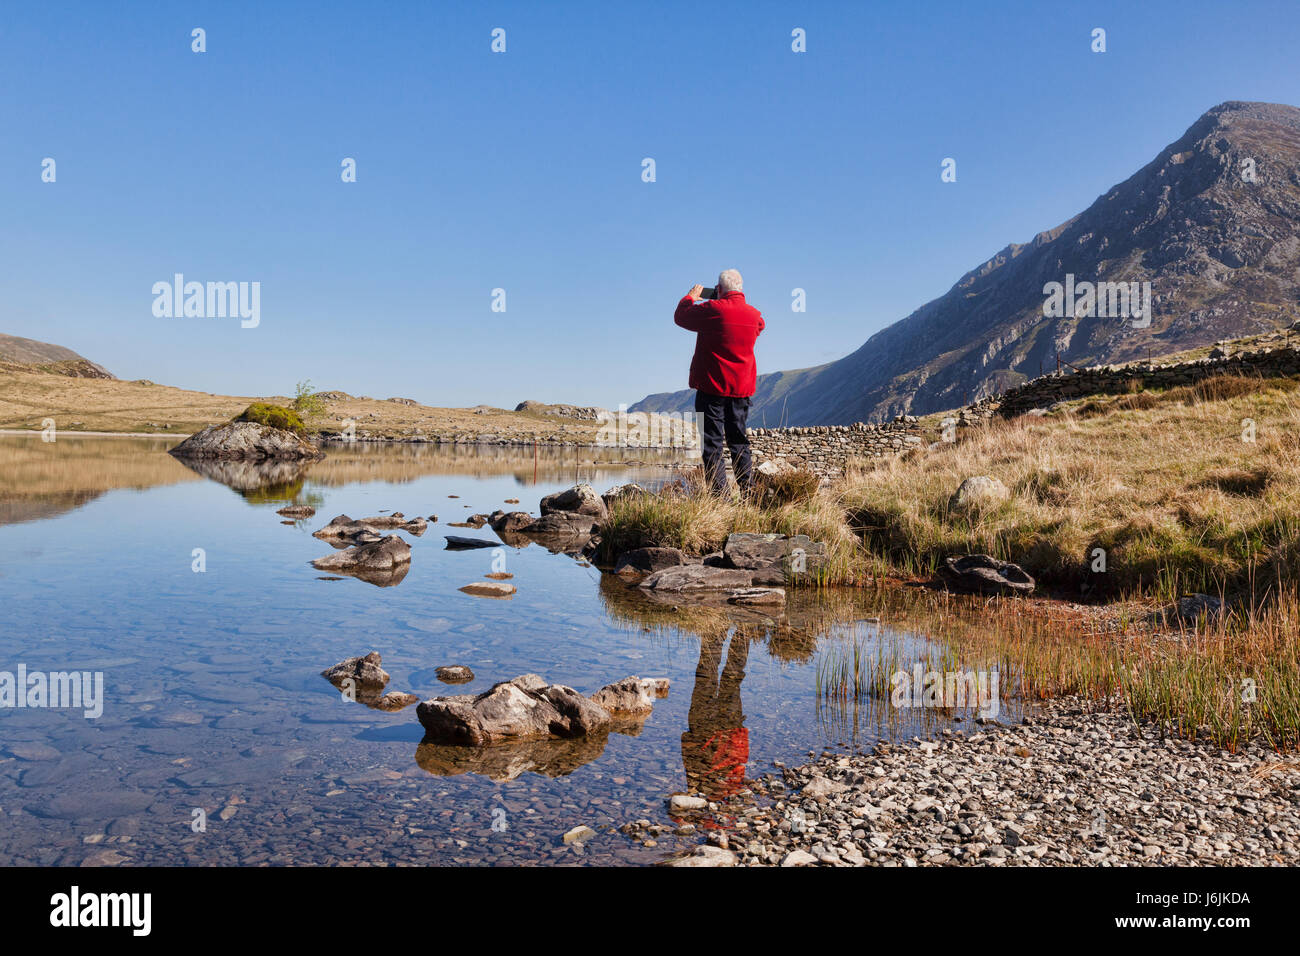 Senior man in red fleece jacket taking photos on his cellphone, at Llyn Idwal, Snowdonia, North Wales, UK, on a beautiful sunny spring day with clear  Stock Photo